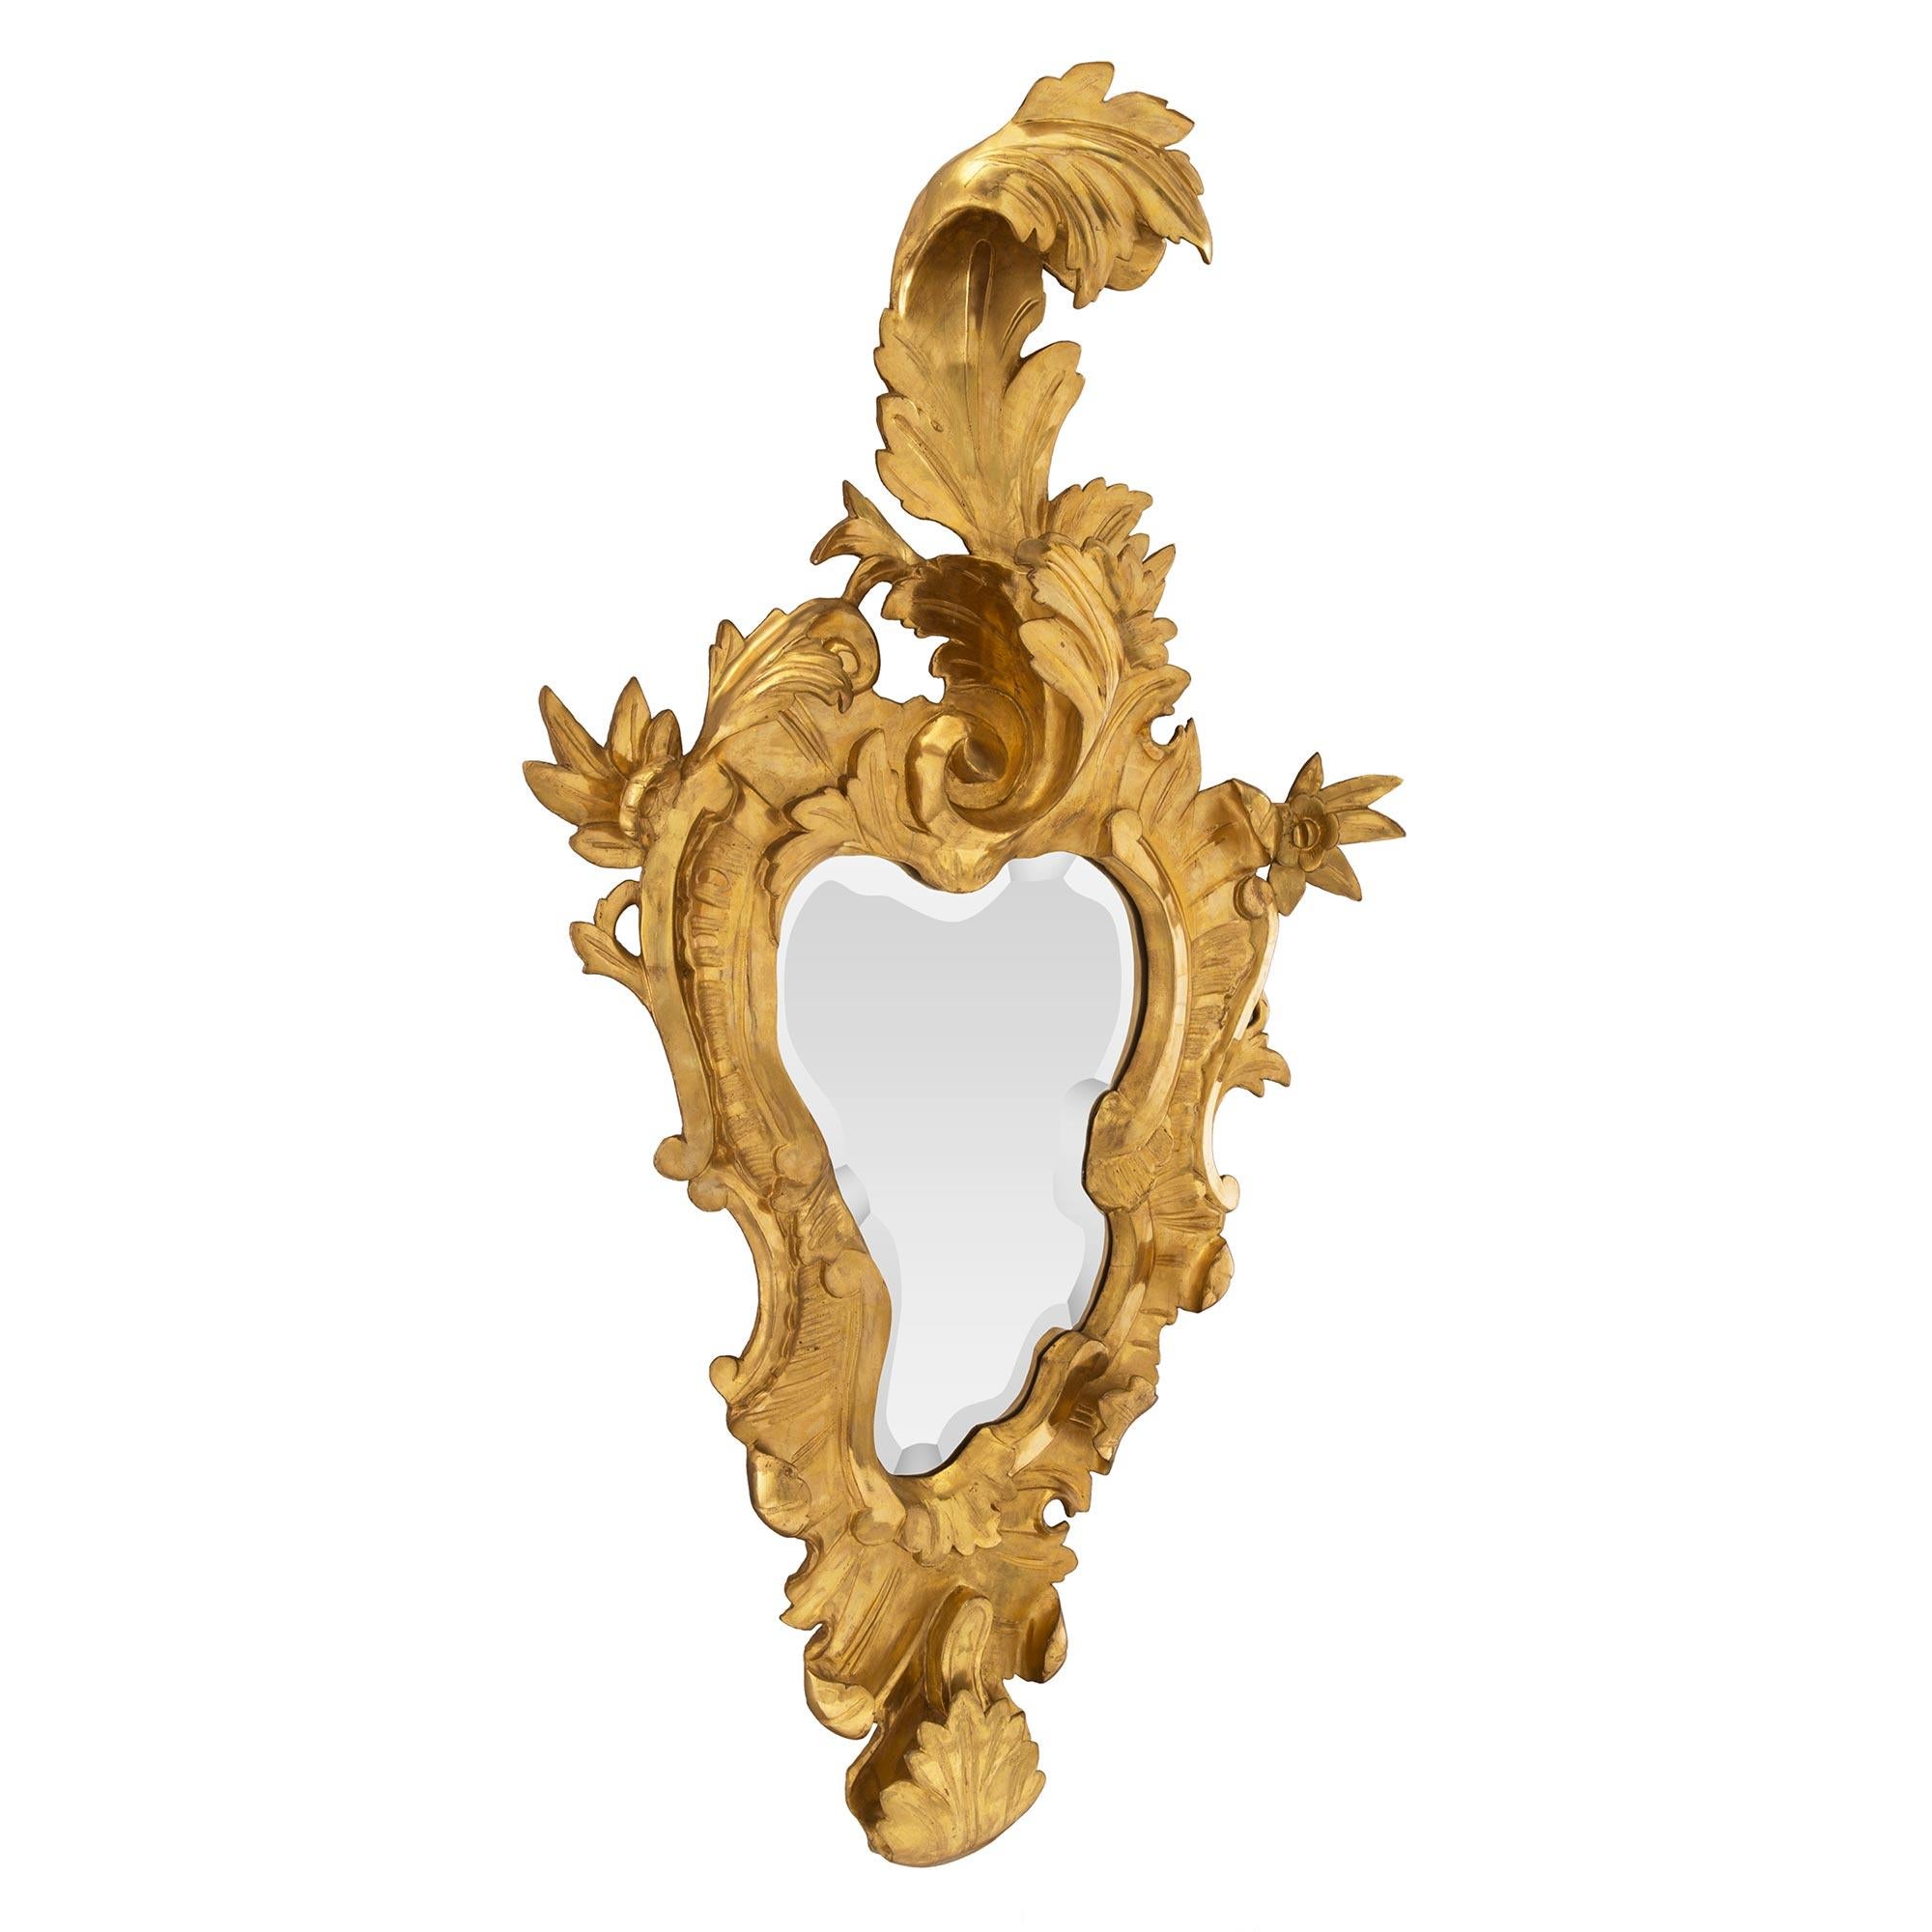 A sensational and true pair of Italian 19th century giltwood Venetian mirrors. Each beveled mirror displays the original mirror plate and follows the contour of the finely carved giltwood frame. The frame displays a rich array of scrolling patterns